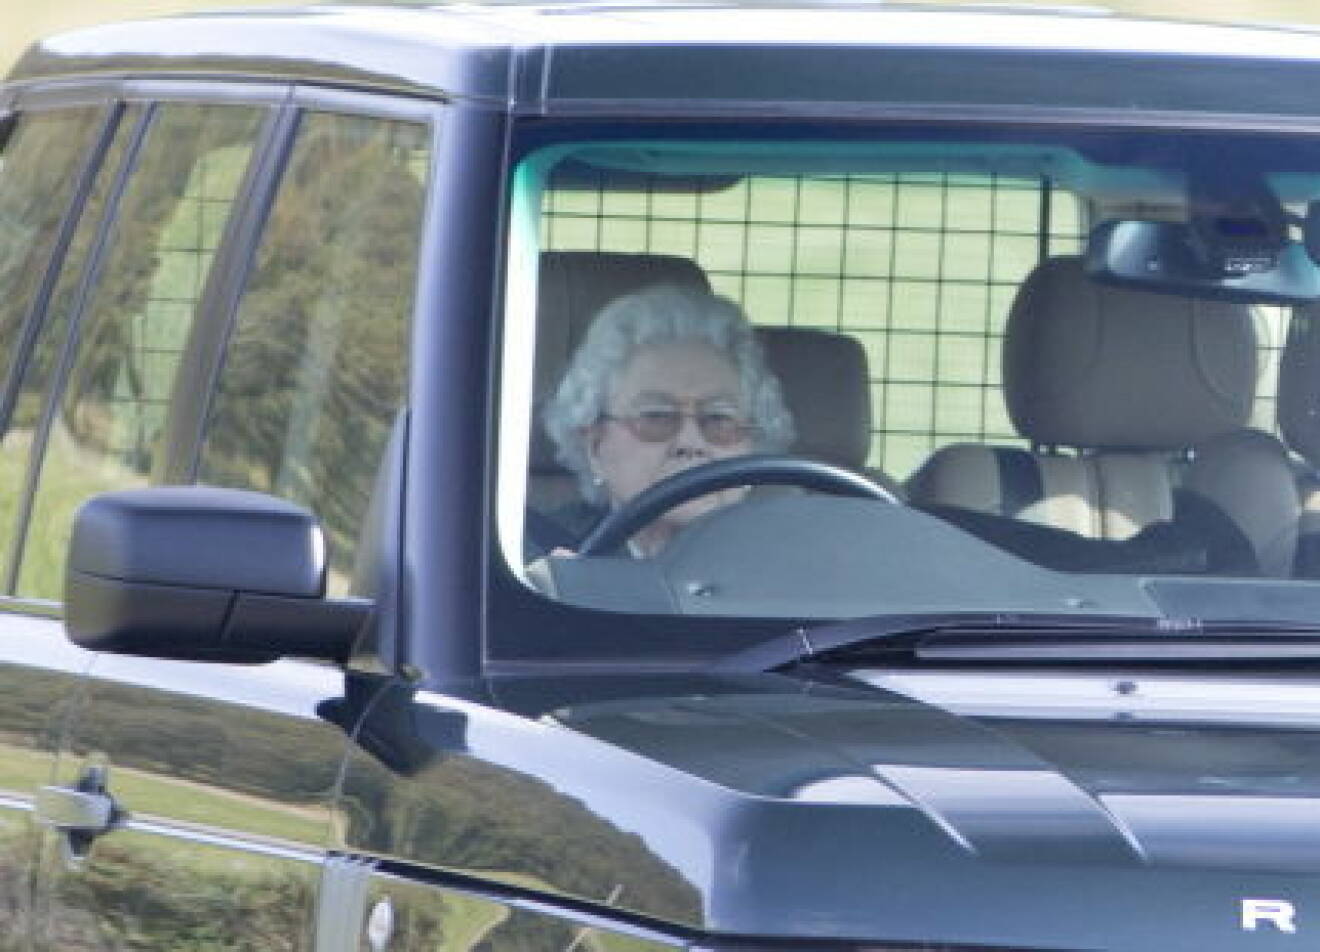 126180, EXCLUSIVE: Queen Elizabeth II at the wheel of her Range Rover as she leaves a grouse shoot near Balmoral, Scotland